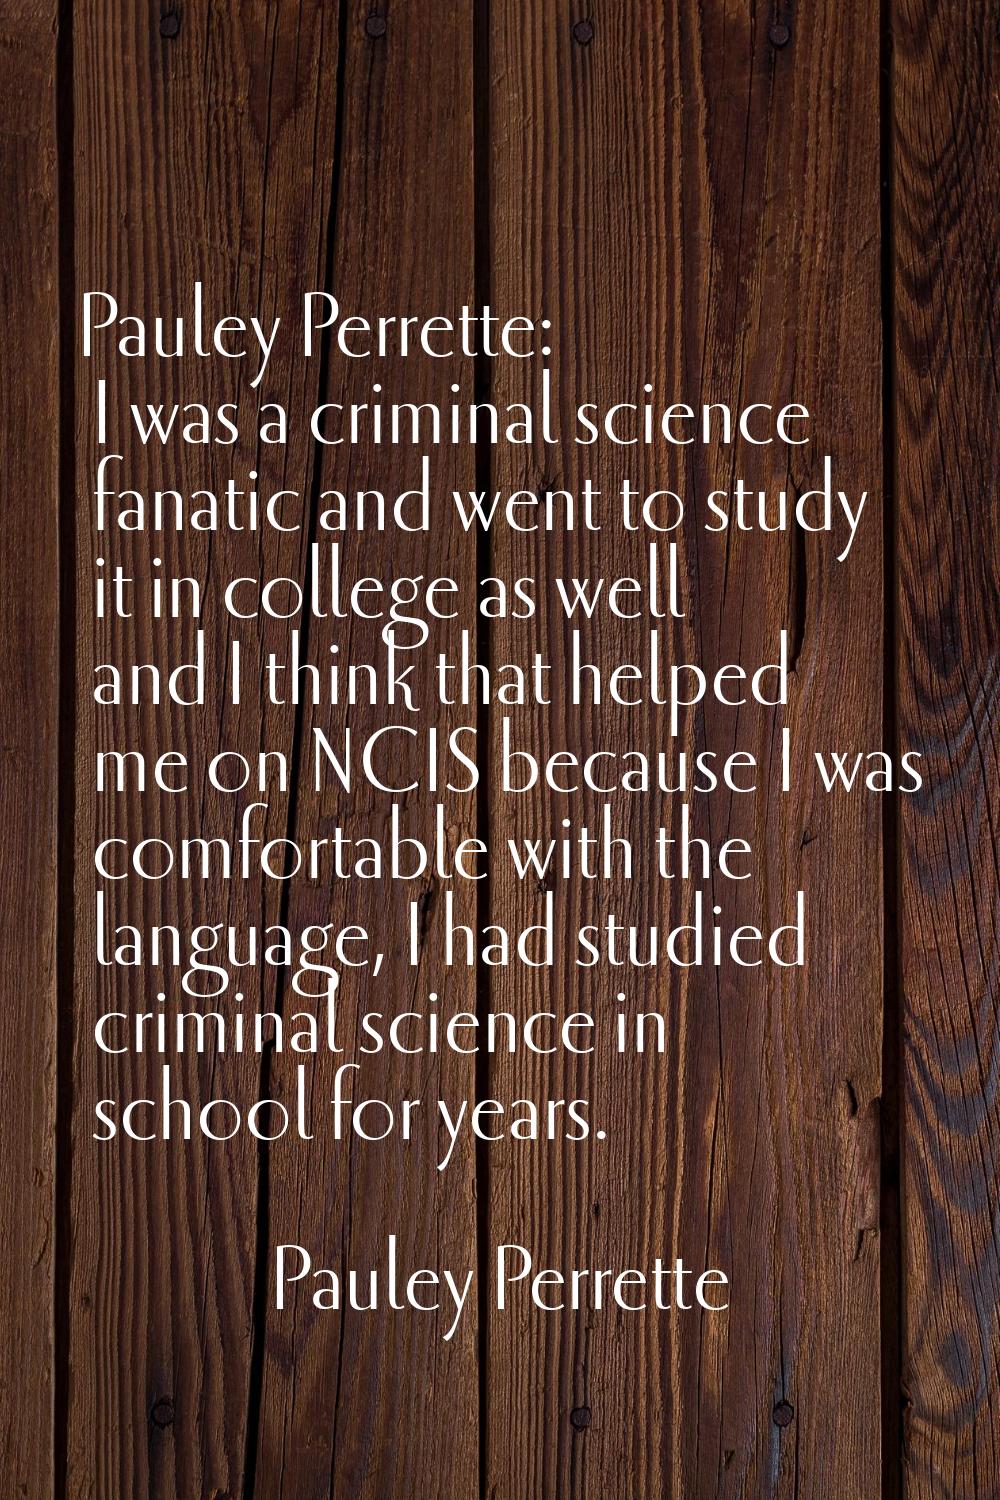 Pauley Perrette: I was a criminal science fanatic and went to study it in college as well and I thi